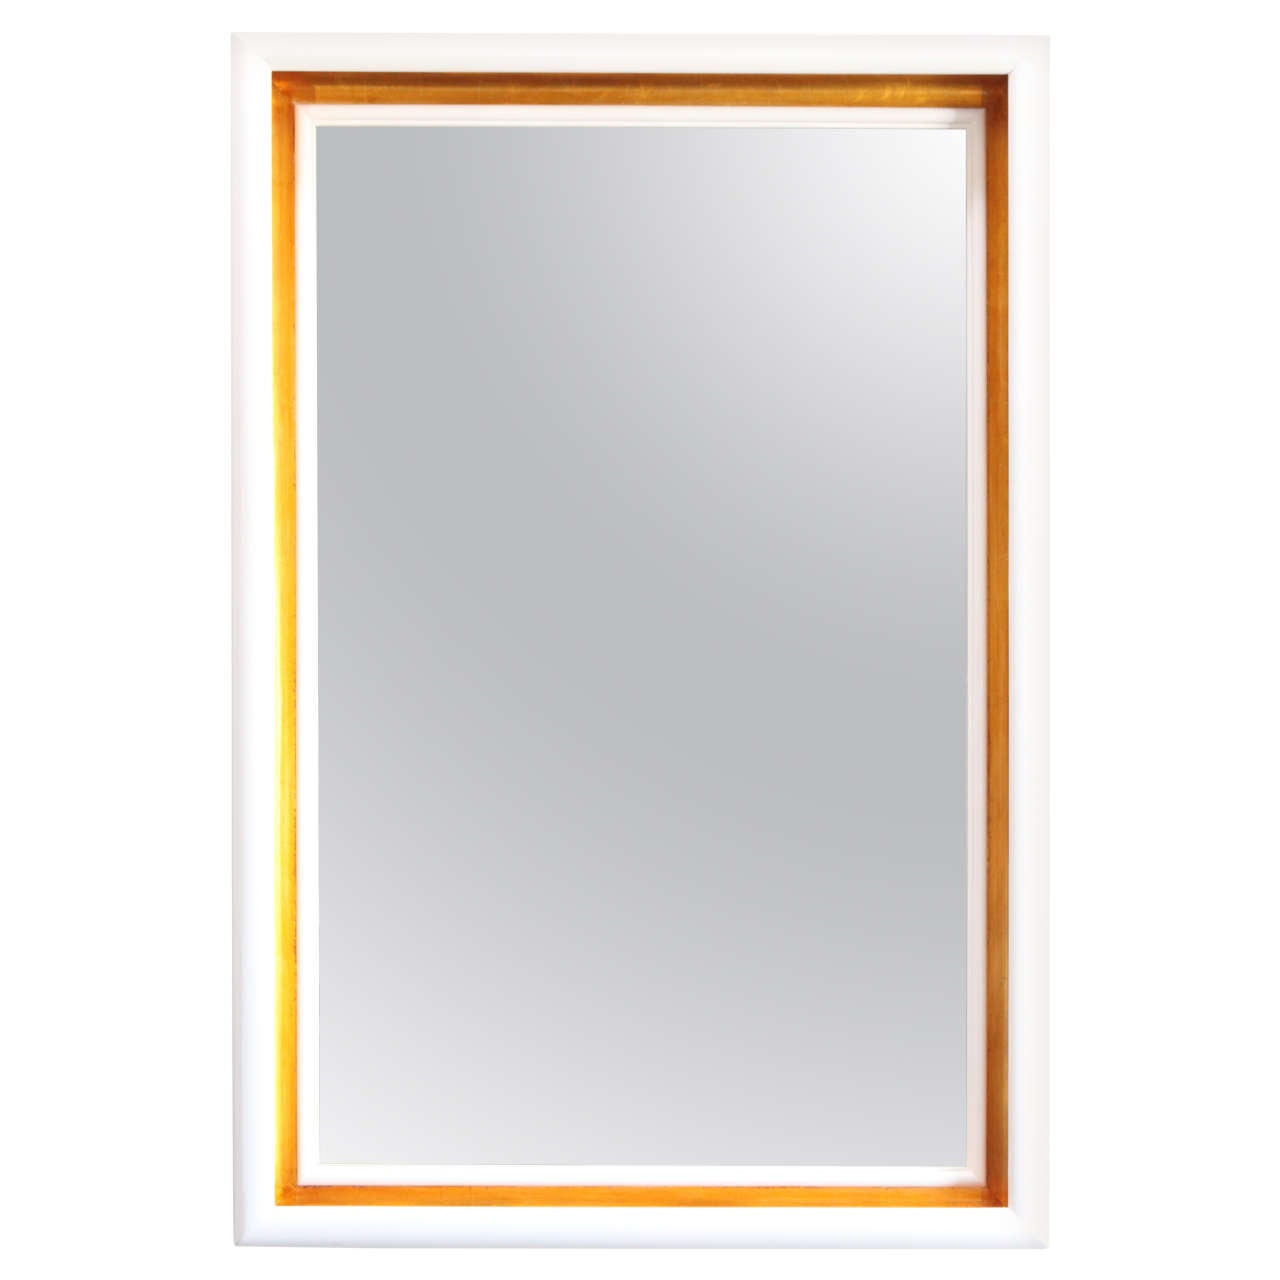 Paul Marra Design Cove Mirror in Lacquer and Gold For Sale